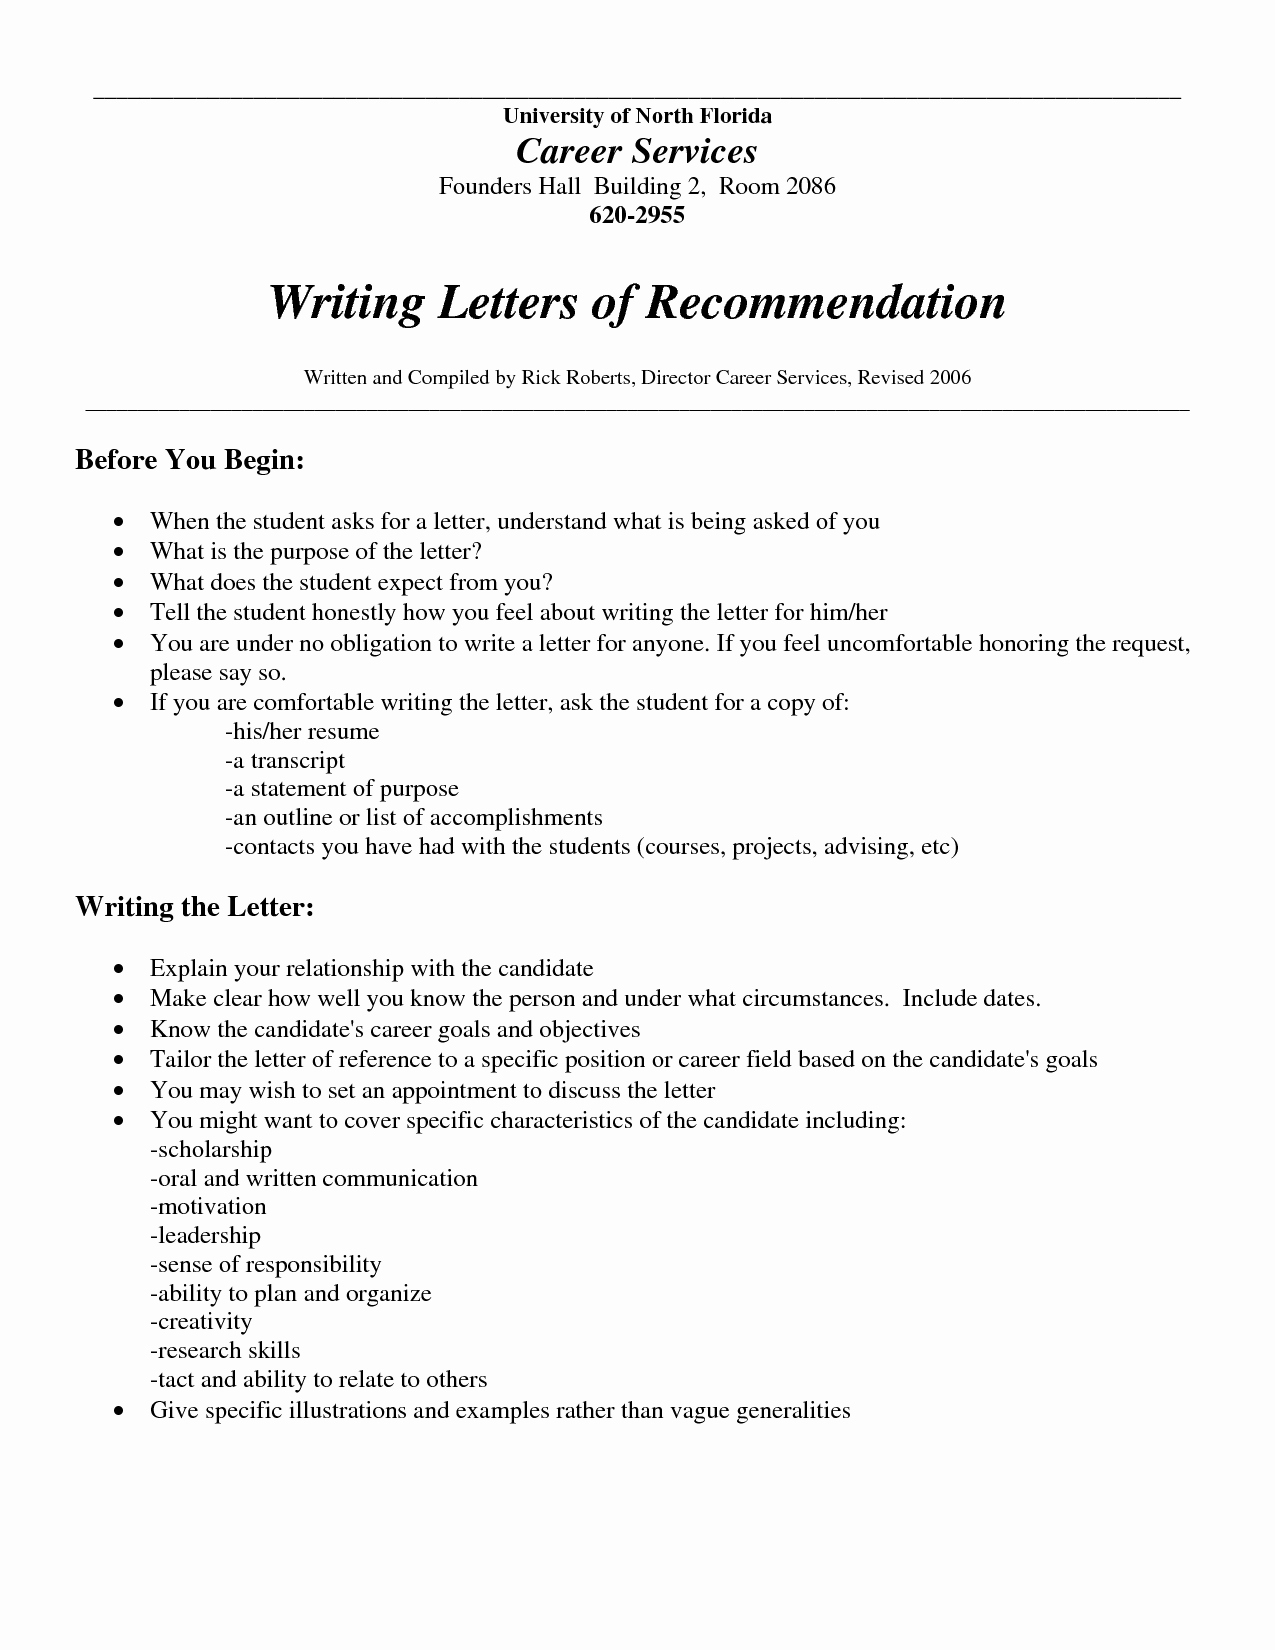 Letter Of Recommendation Template Job Letter Of Recommendation Job Recommendation Letter